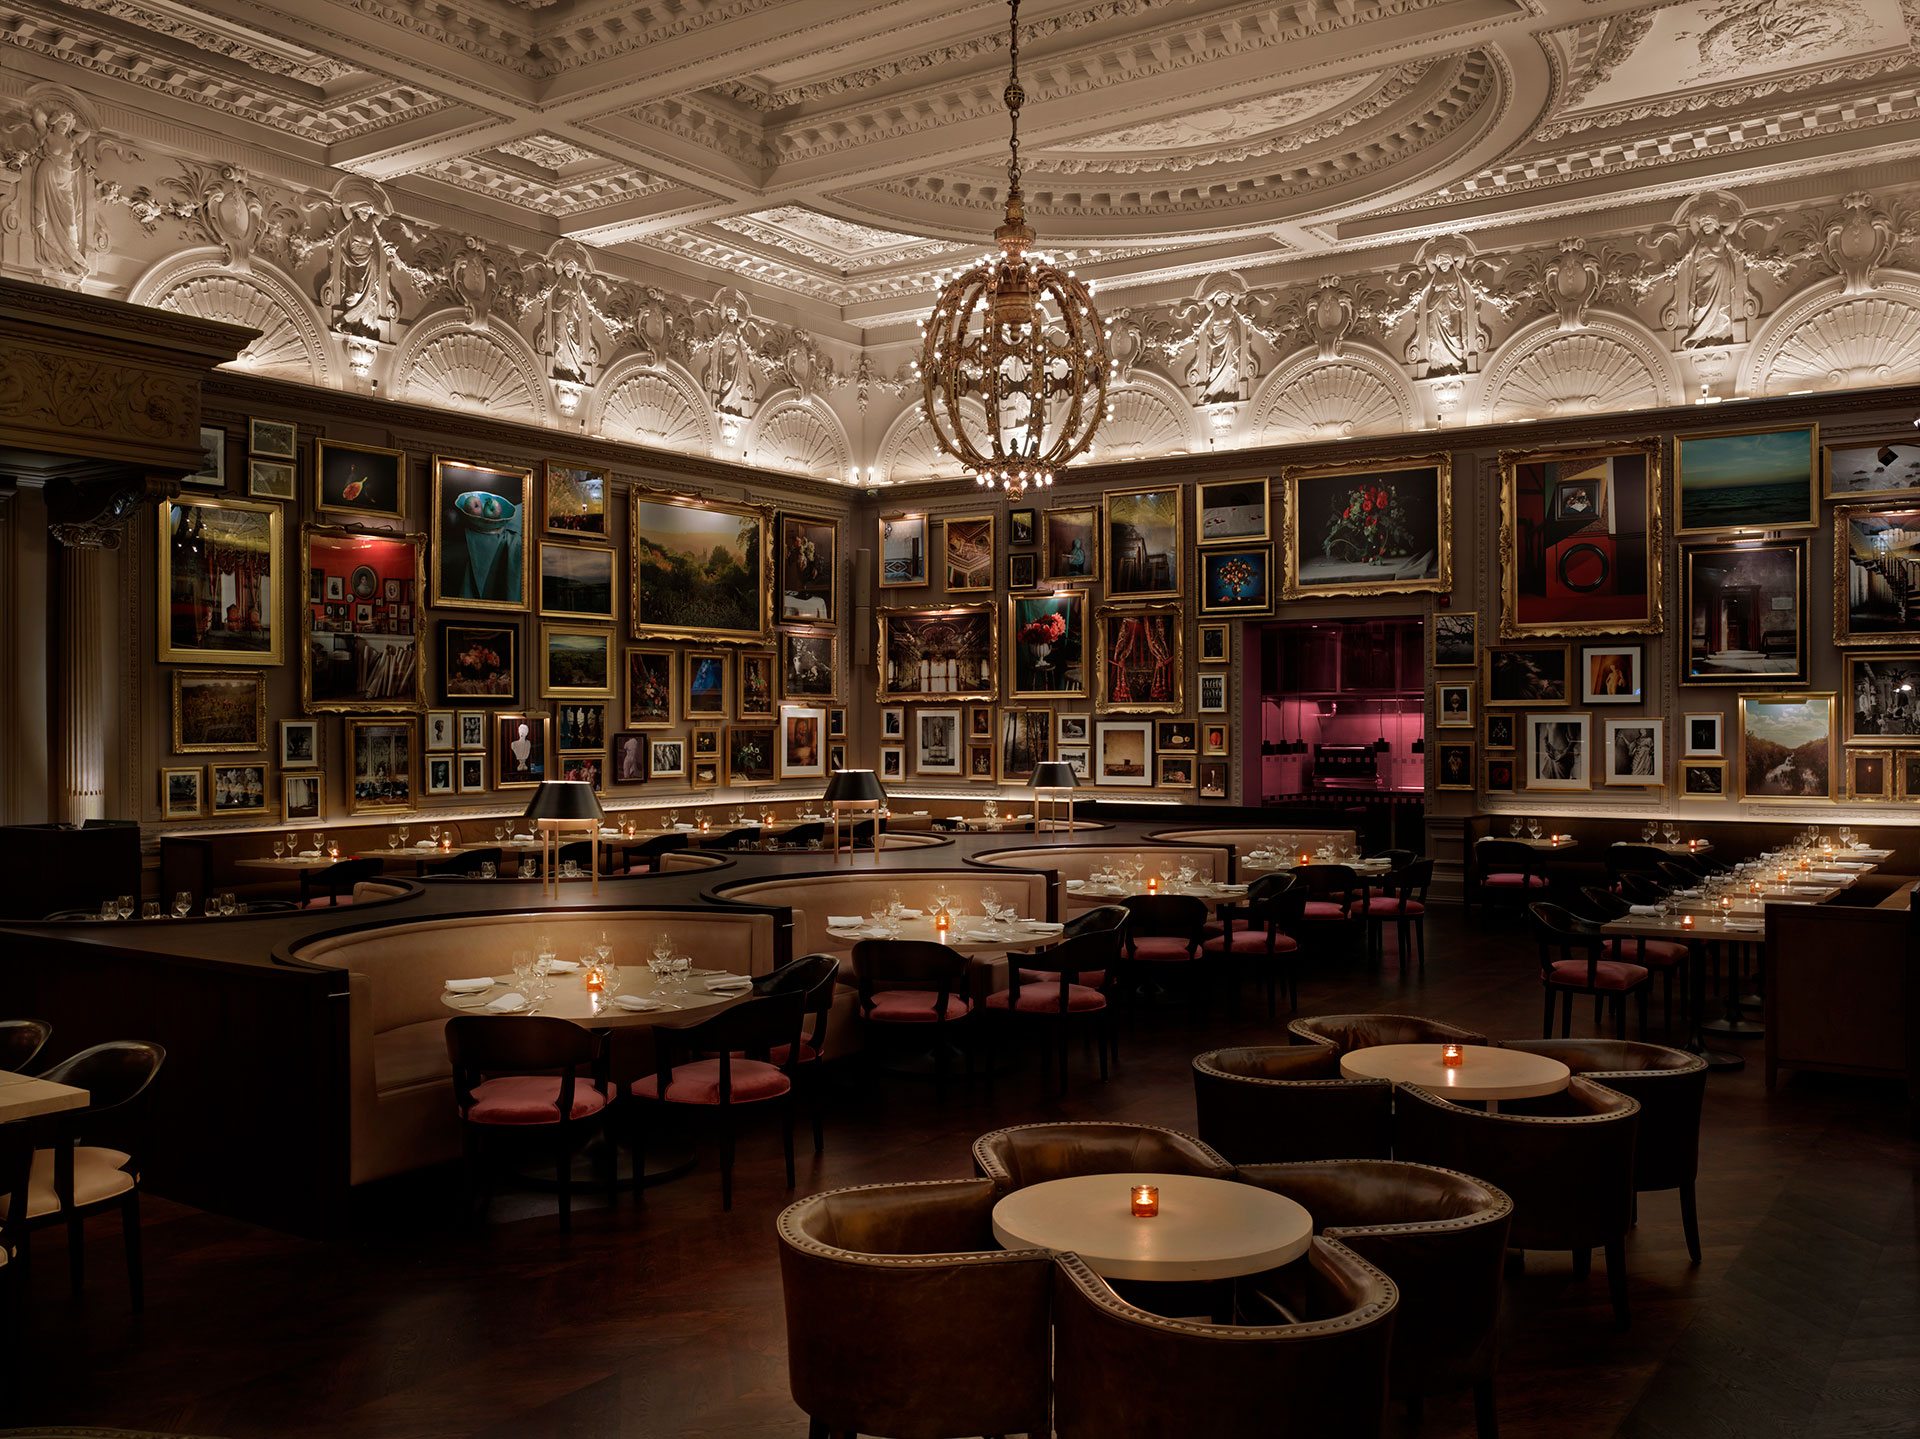 In romantic central london restaurants The Most